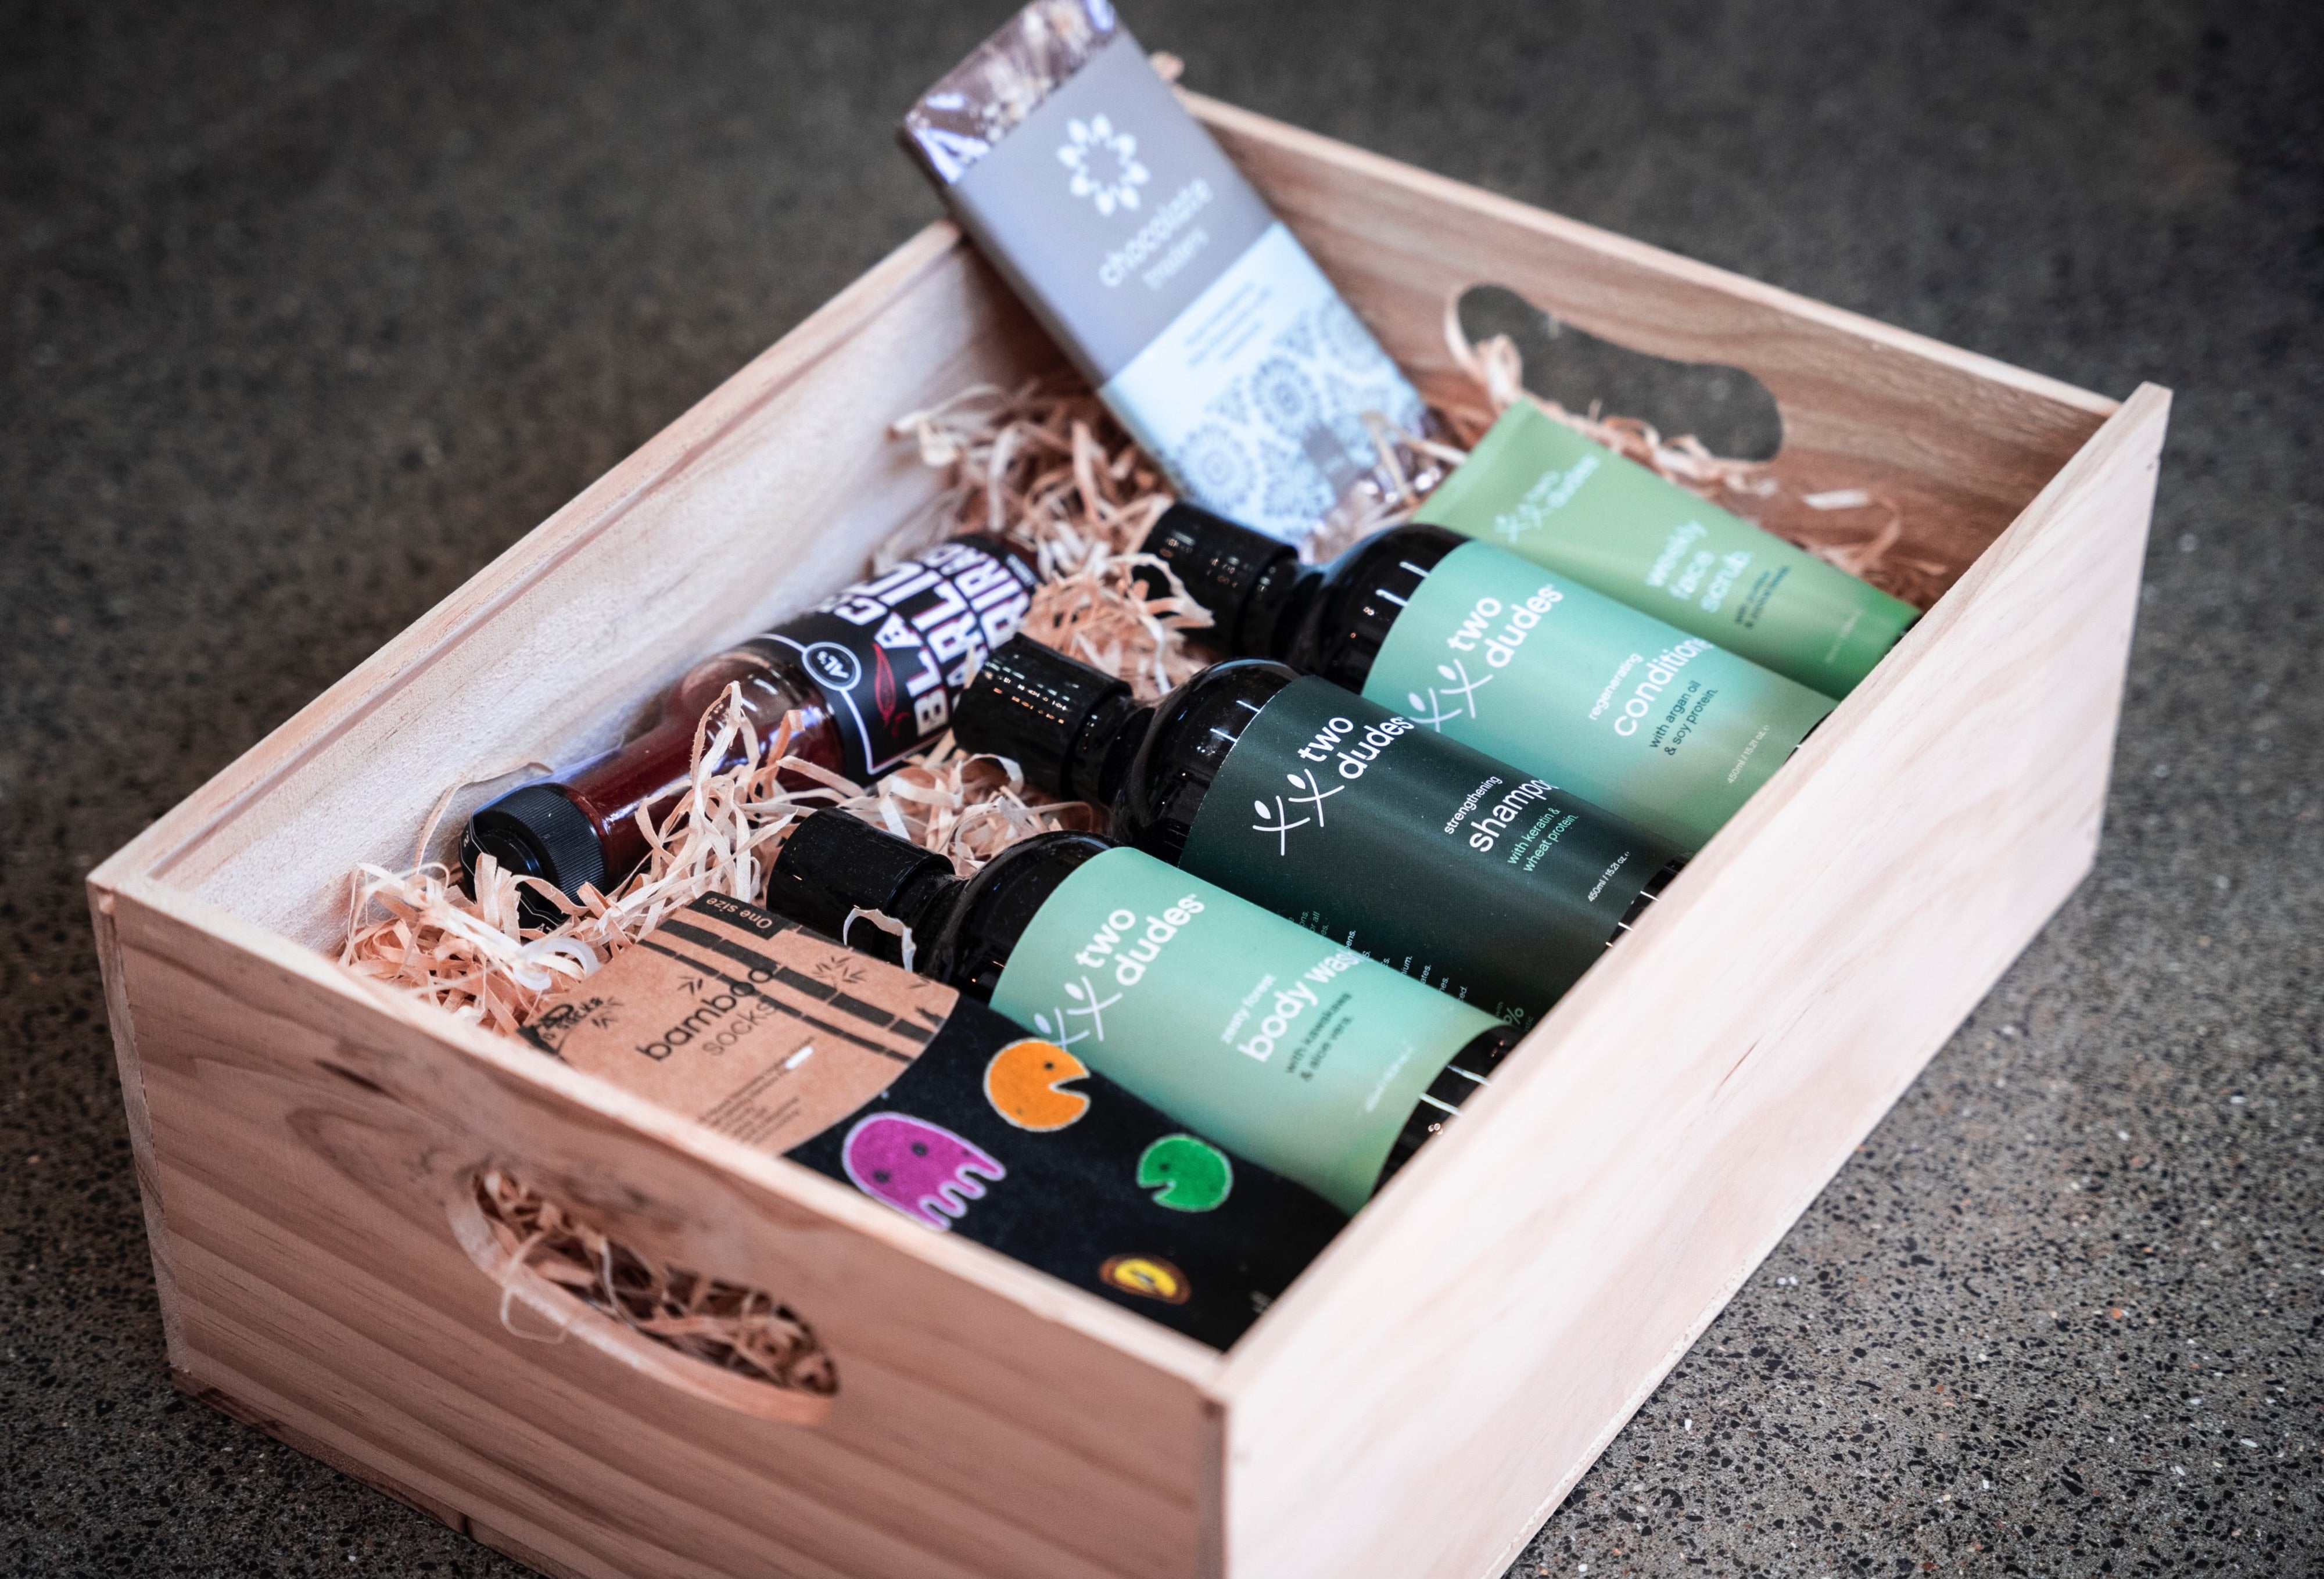 A His giftbox co. filled with various men's grooming products, including bottles and tubes, neatly arranged on a bed of straw, displayed on a gray surface.